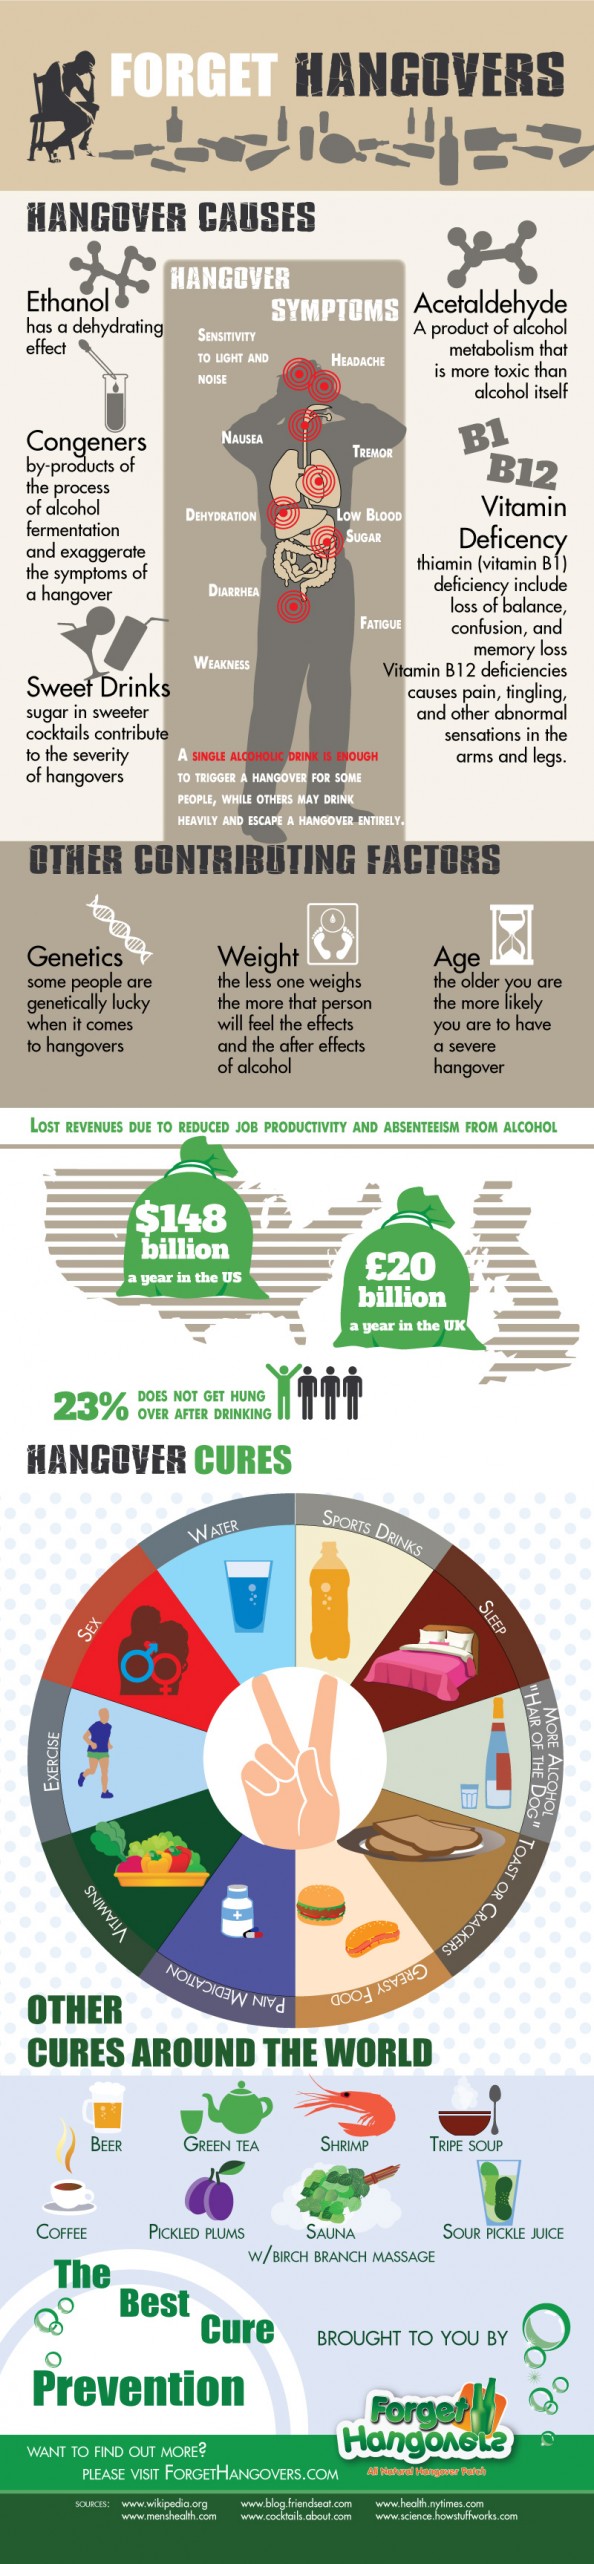 forget-hangovers